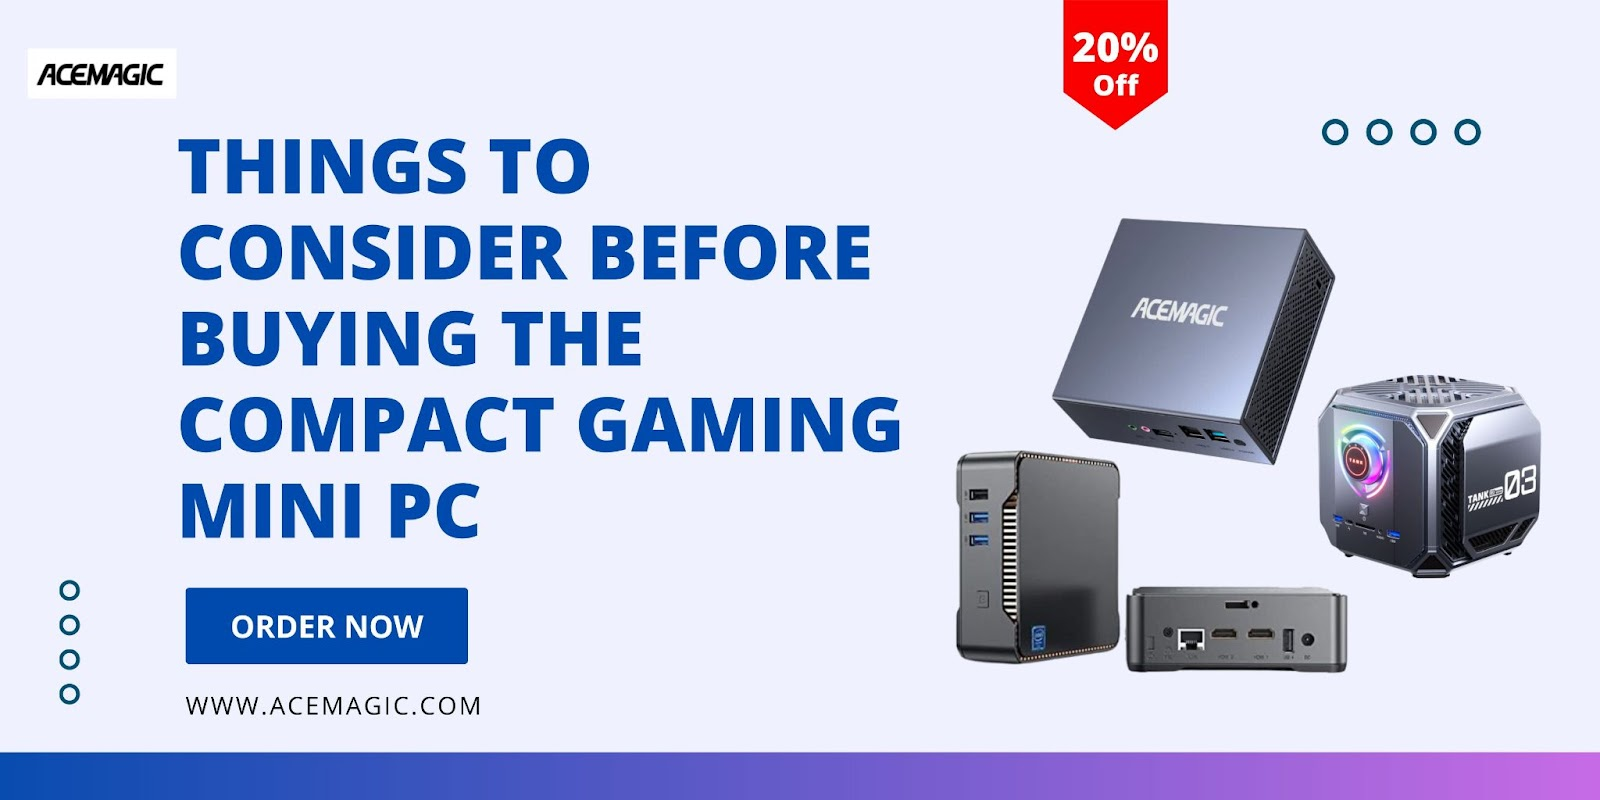 Things to Consider Before Buying The Compact Gaming Mini PC